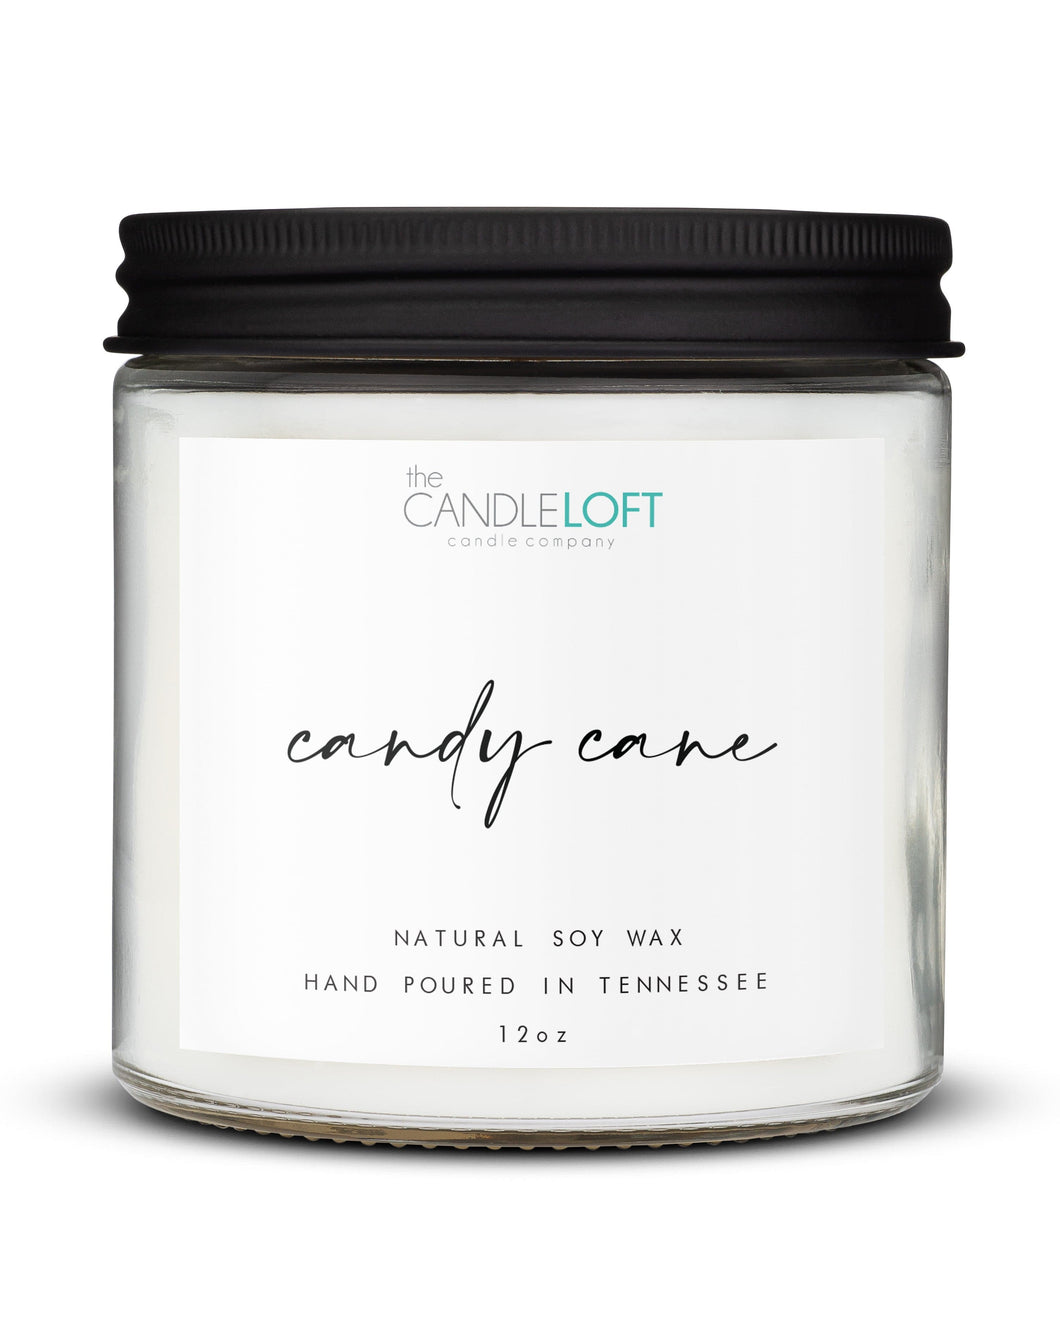 The Candle Loft Candles Signature 12oz Candy Cane Candle